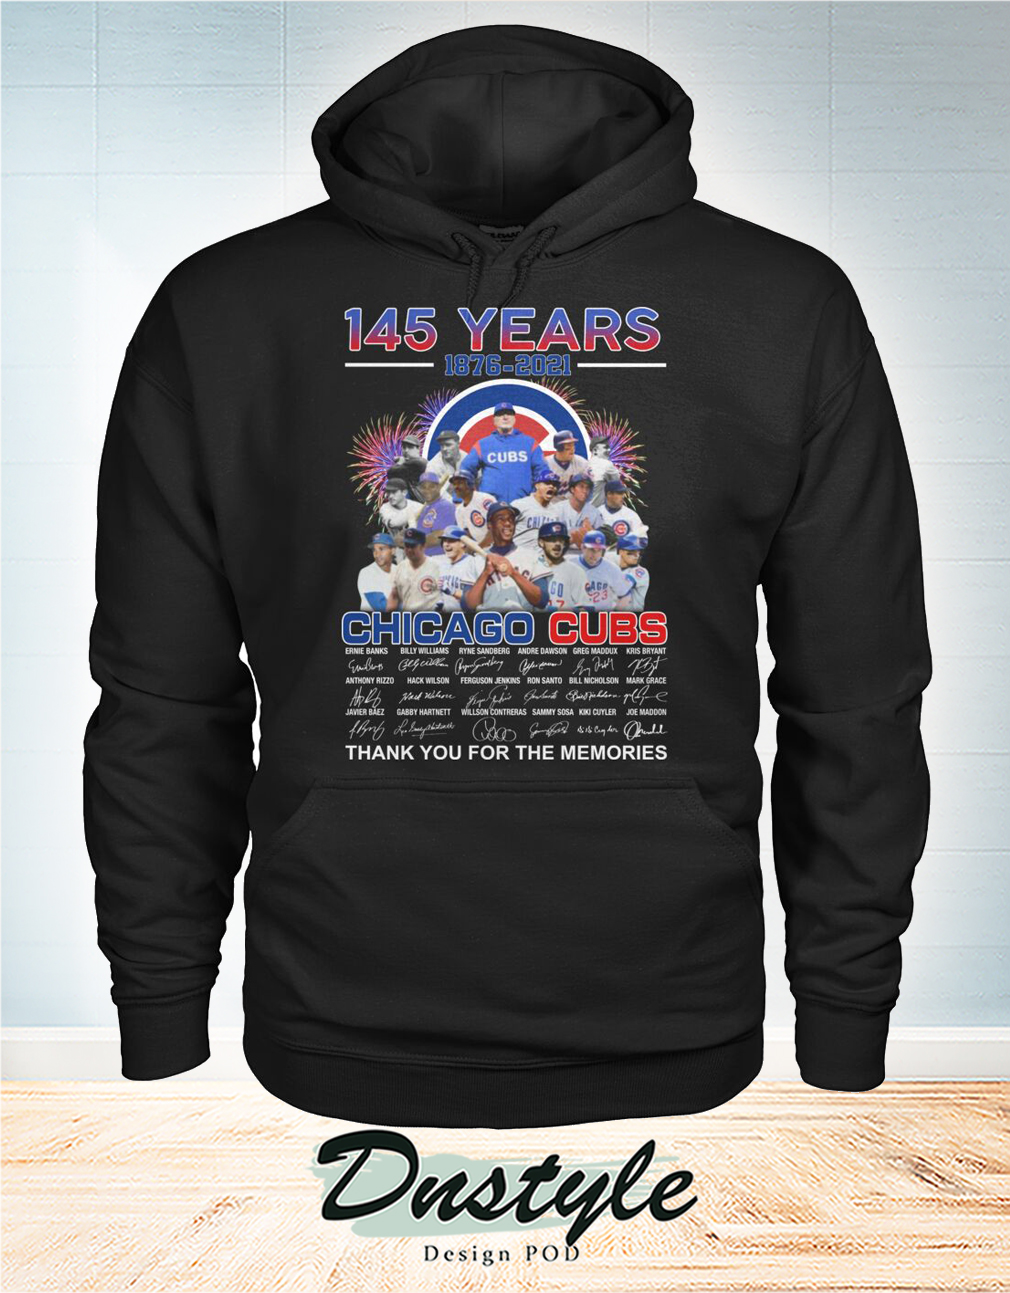 Chicago cubs 145 years signature thank you for the memories hoodie